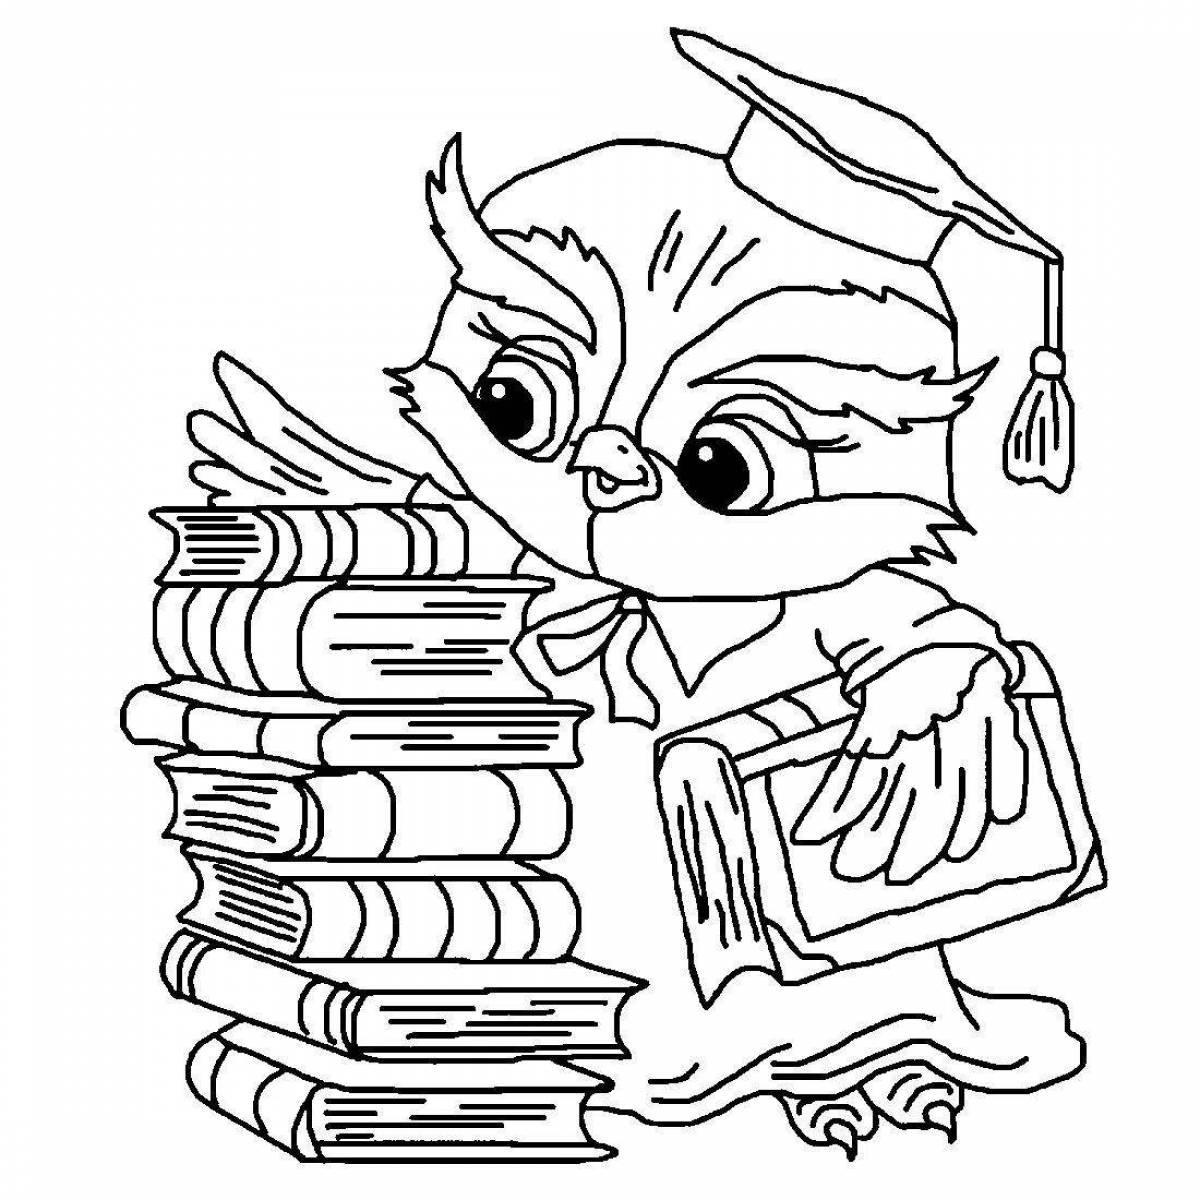 Playful smart owl coloring book for kids